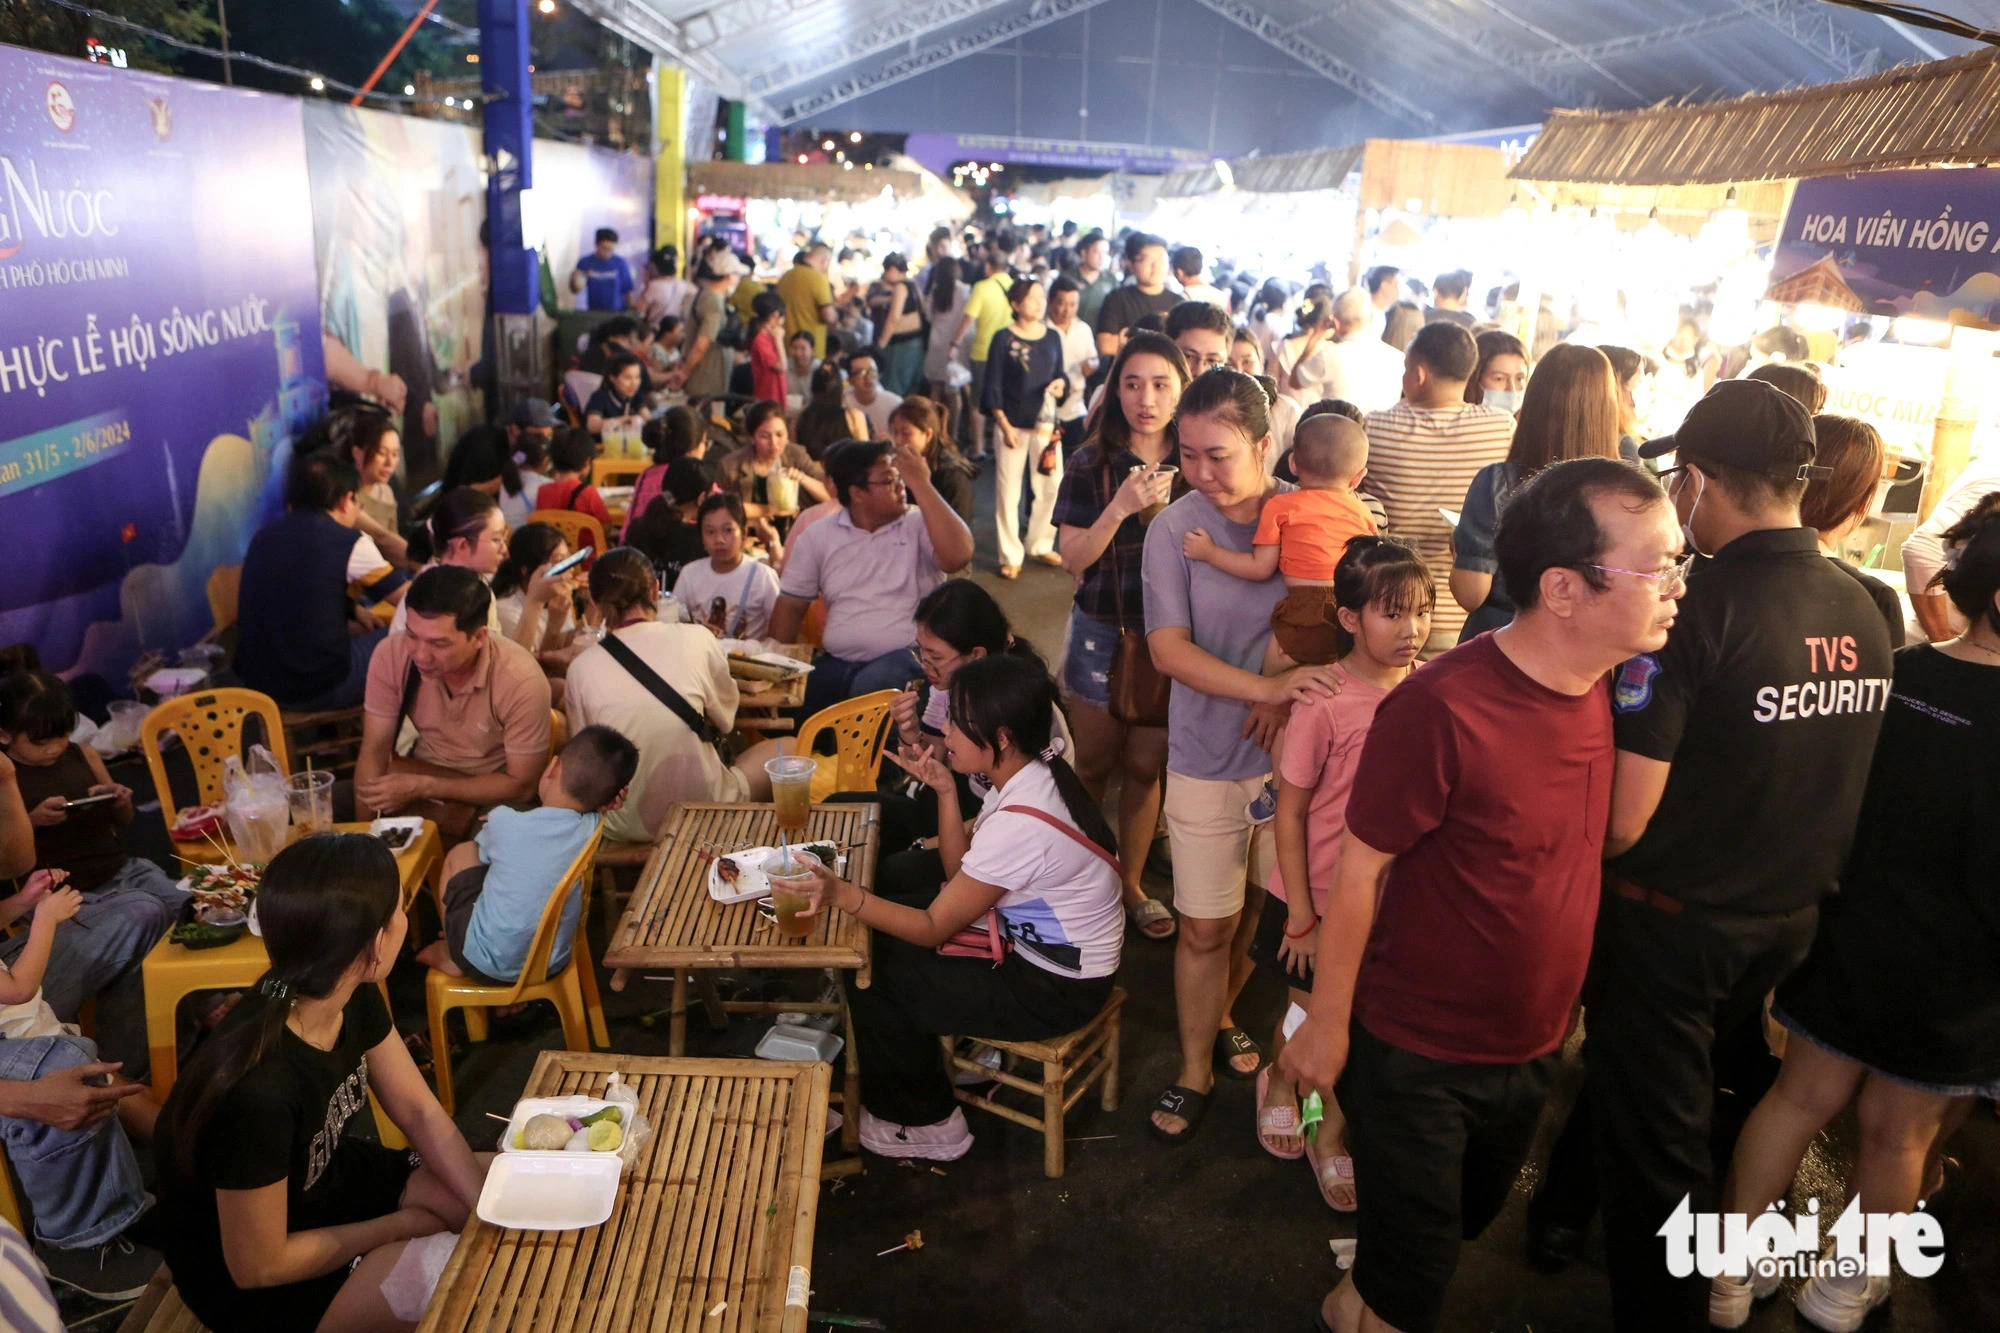 Walkways at the cuisine event are crowded with visitors. Photo: Phuong Quyen / Tuoi Tre